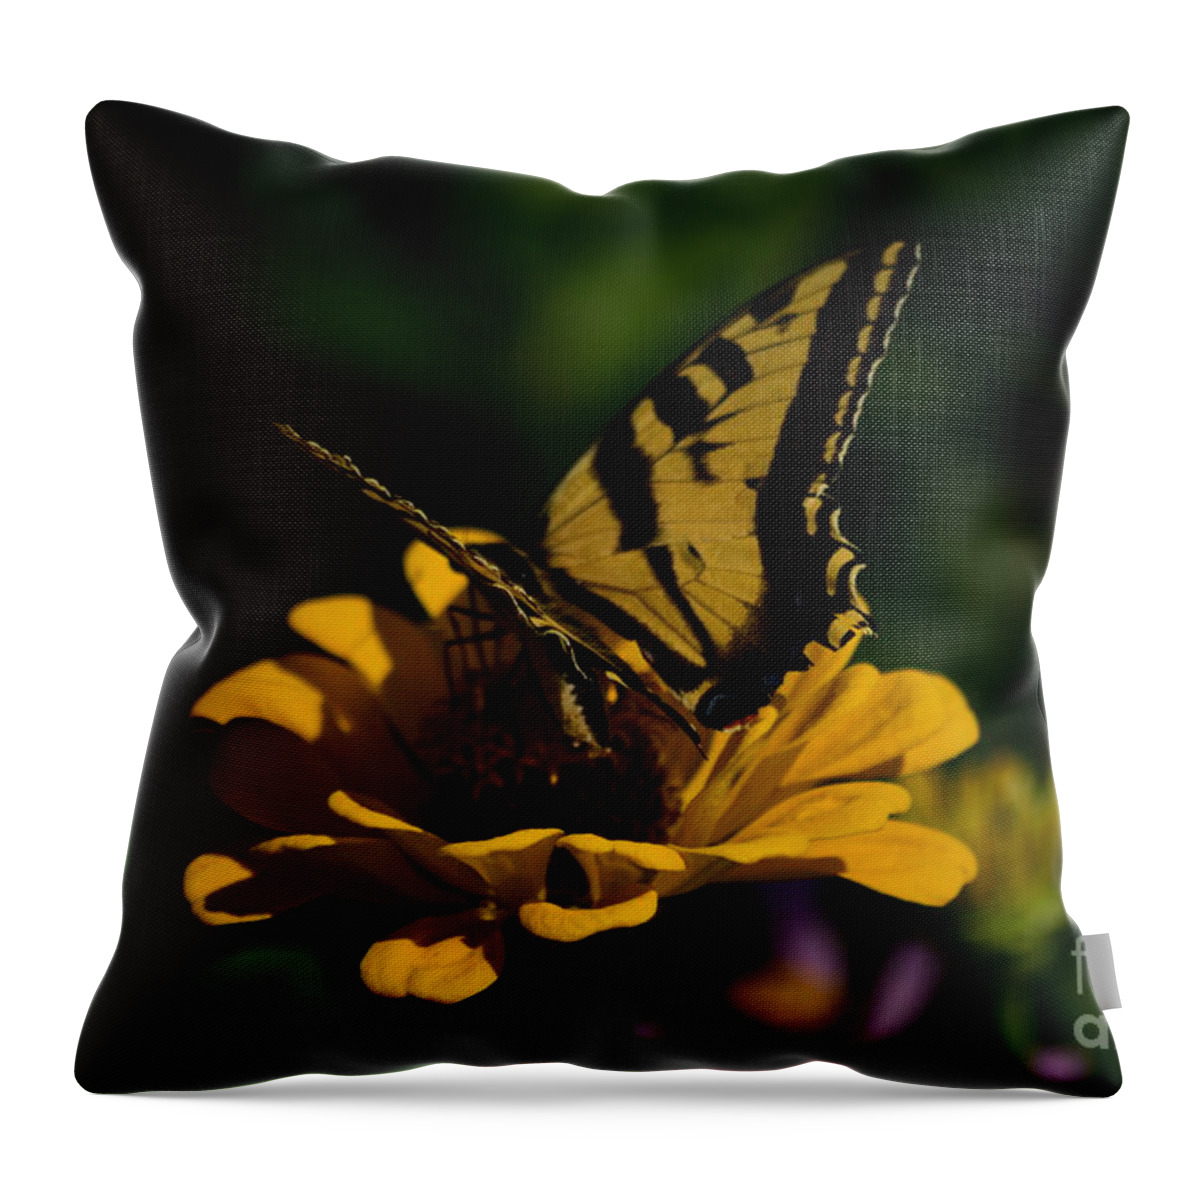 Butterfly Throw Pillow featuring the digital art Butterfly by Yenni Harrison